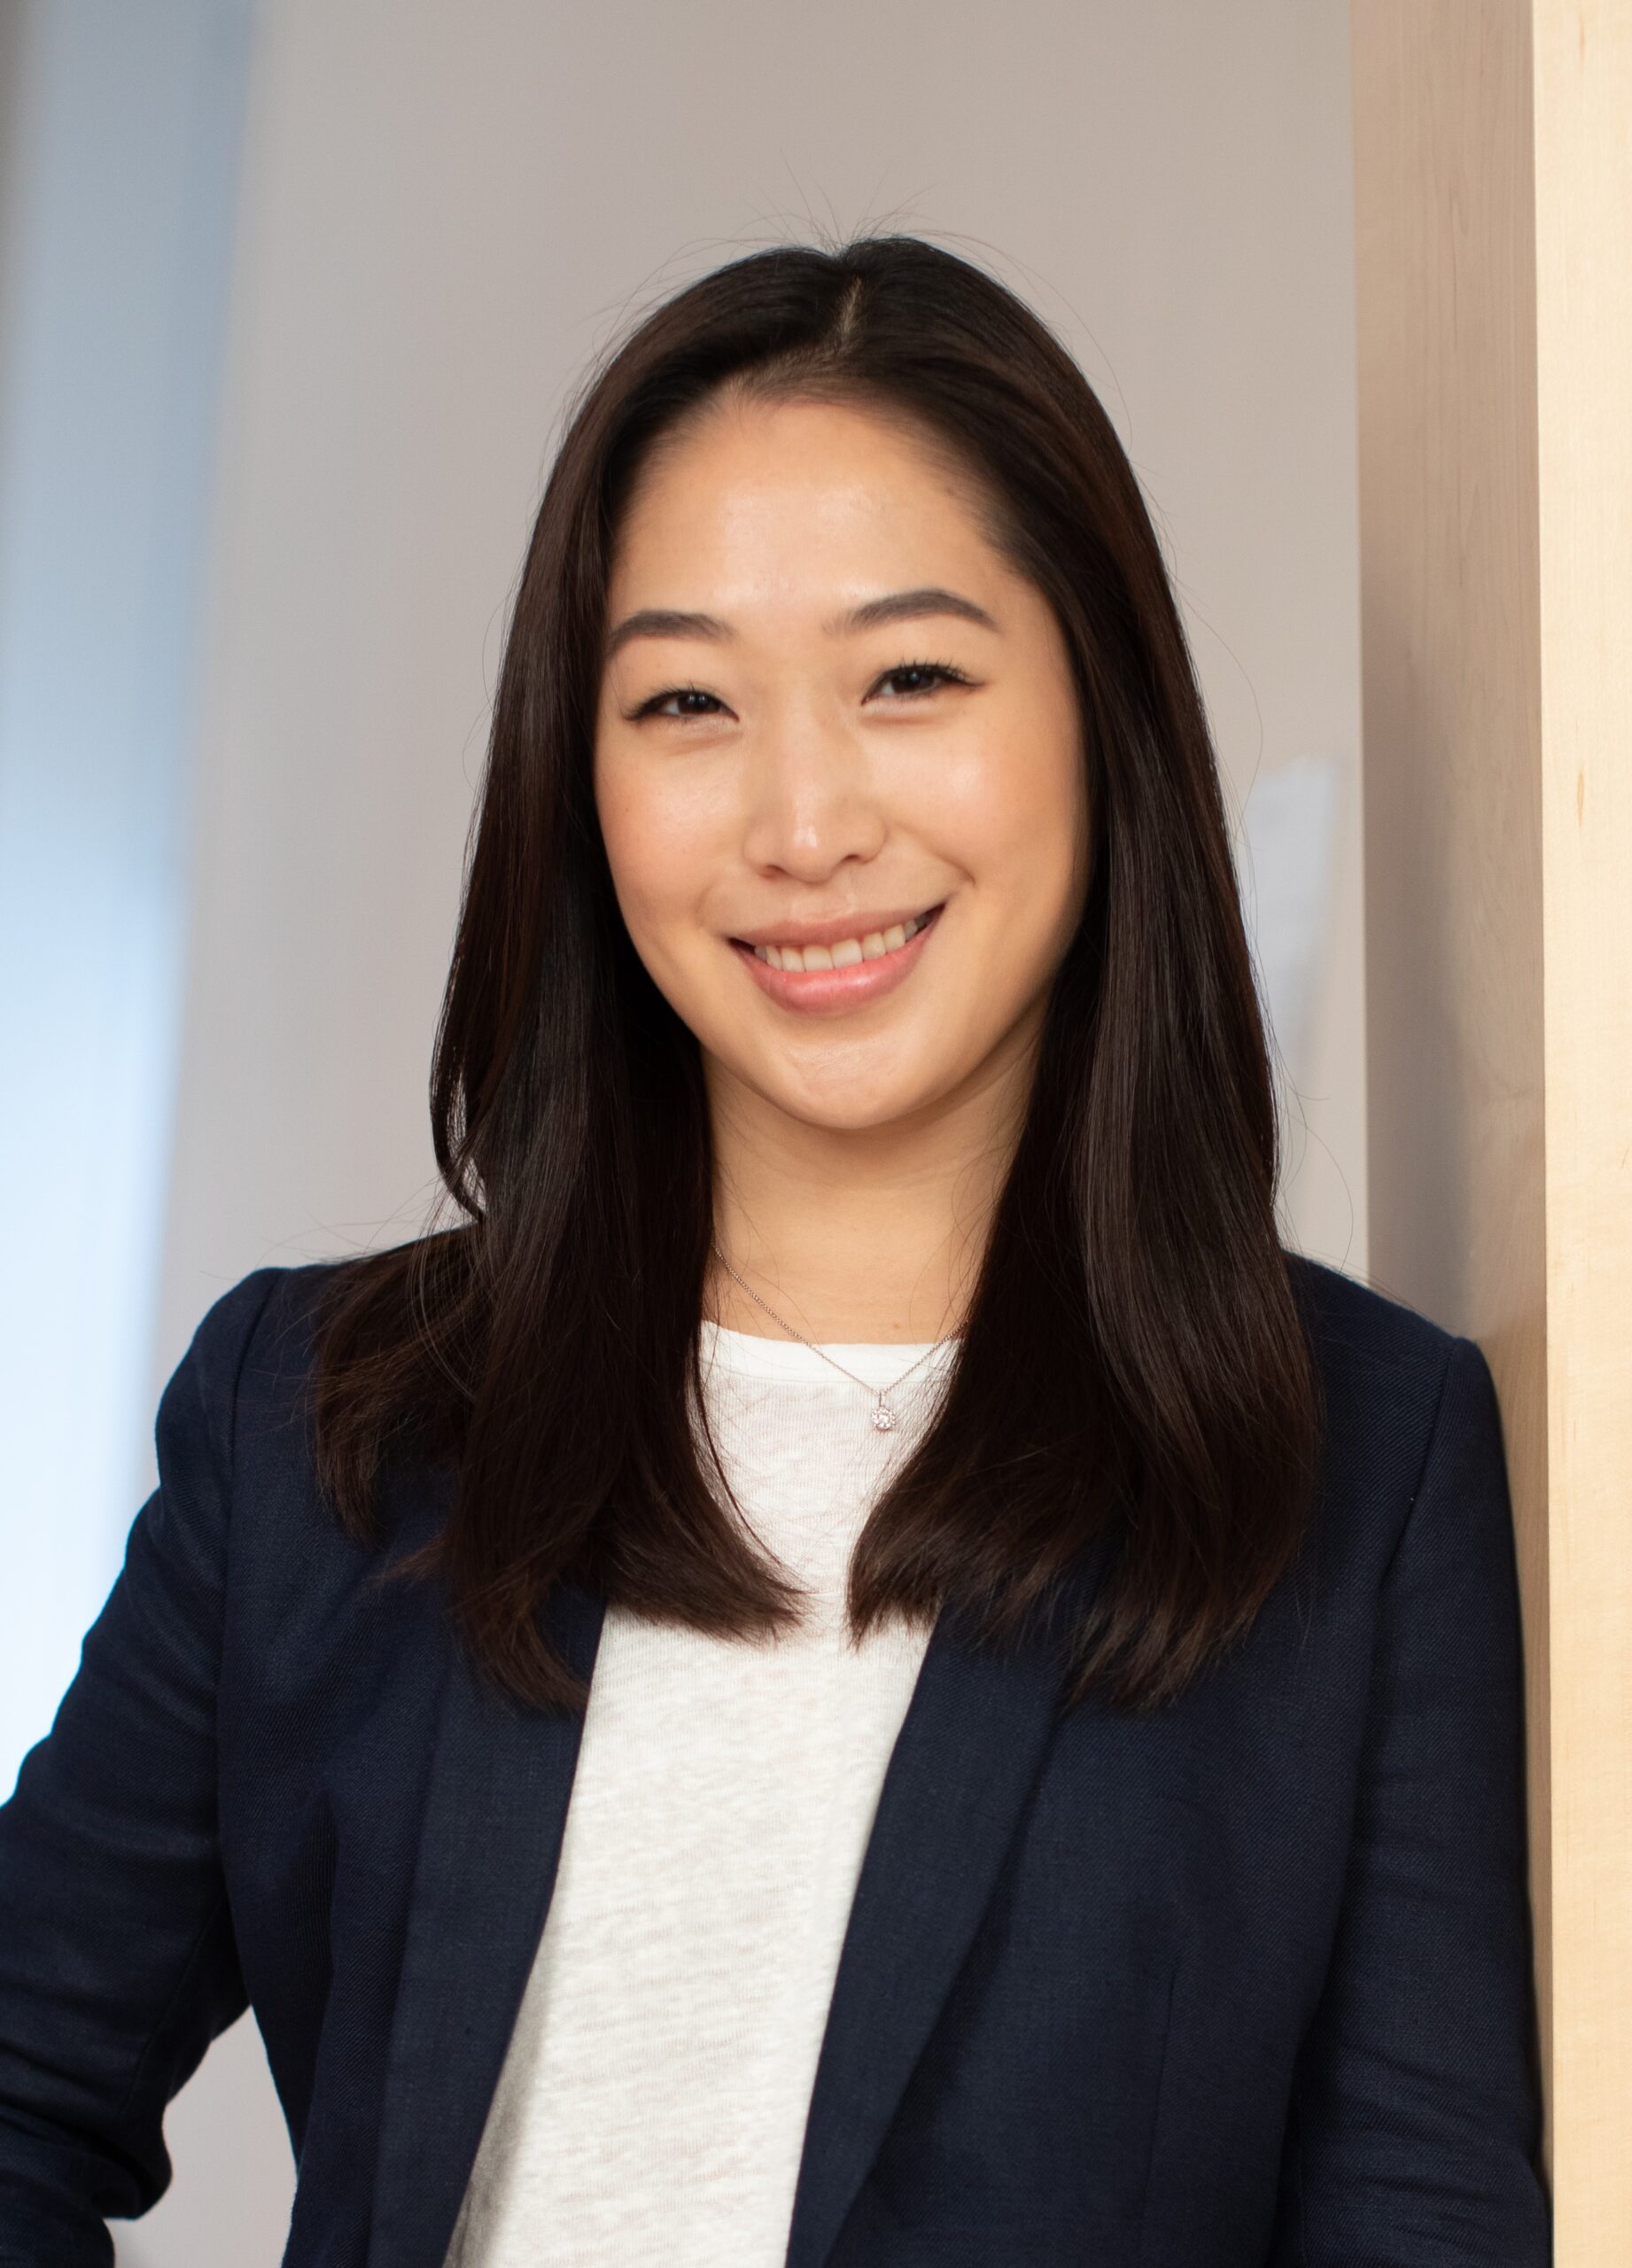 SFMOMA Announces the Appointment of Sheila Shin as Chief Experience Officer